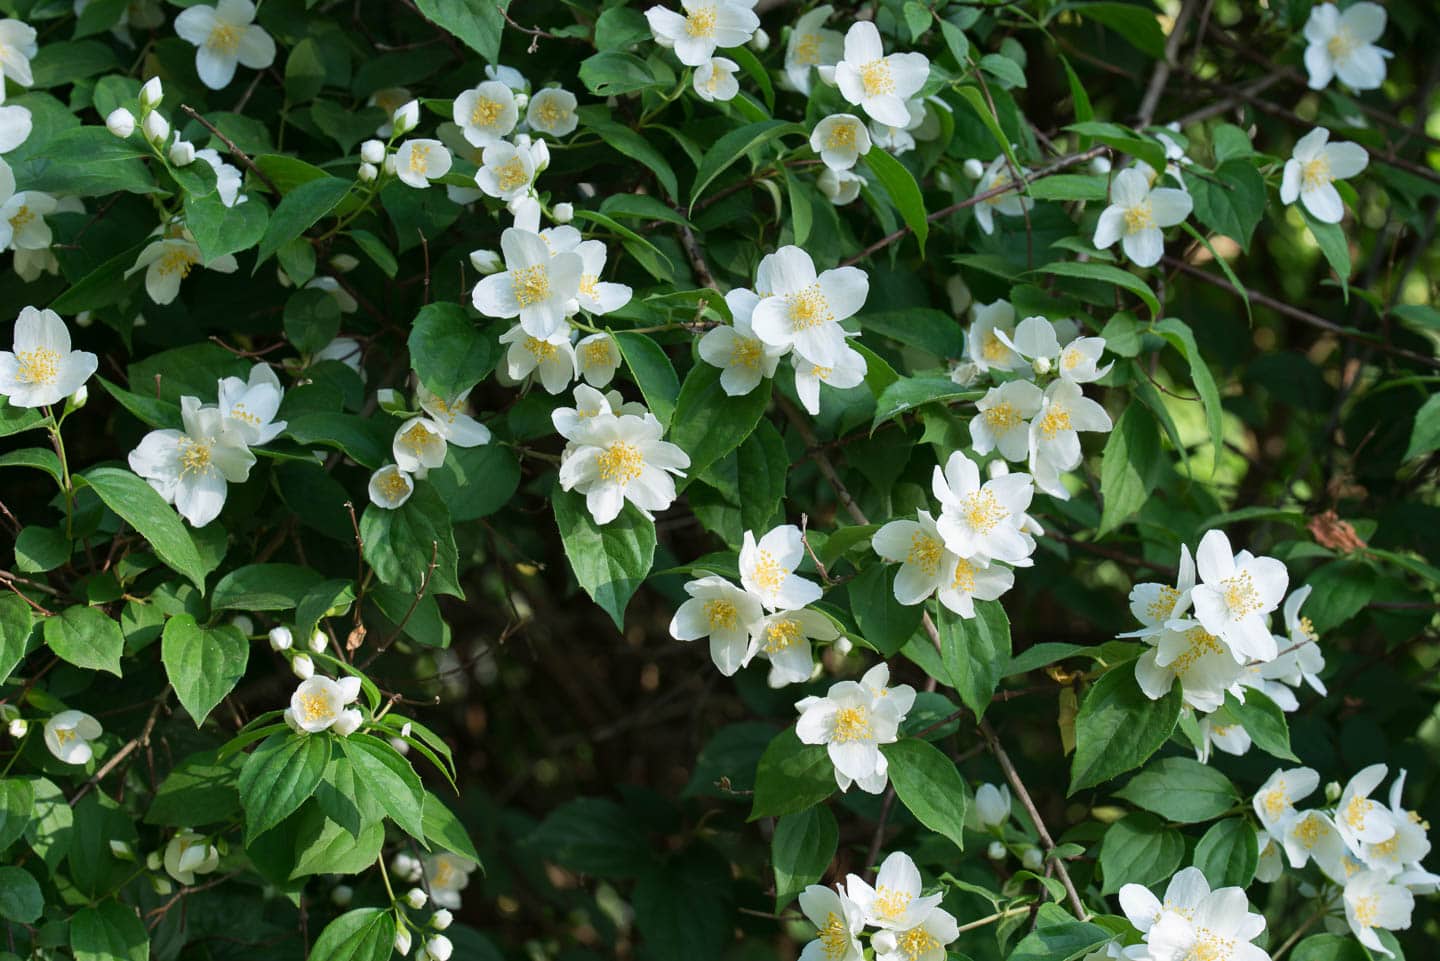 mockorange blooms - white flowers with yellow centers